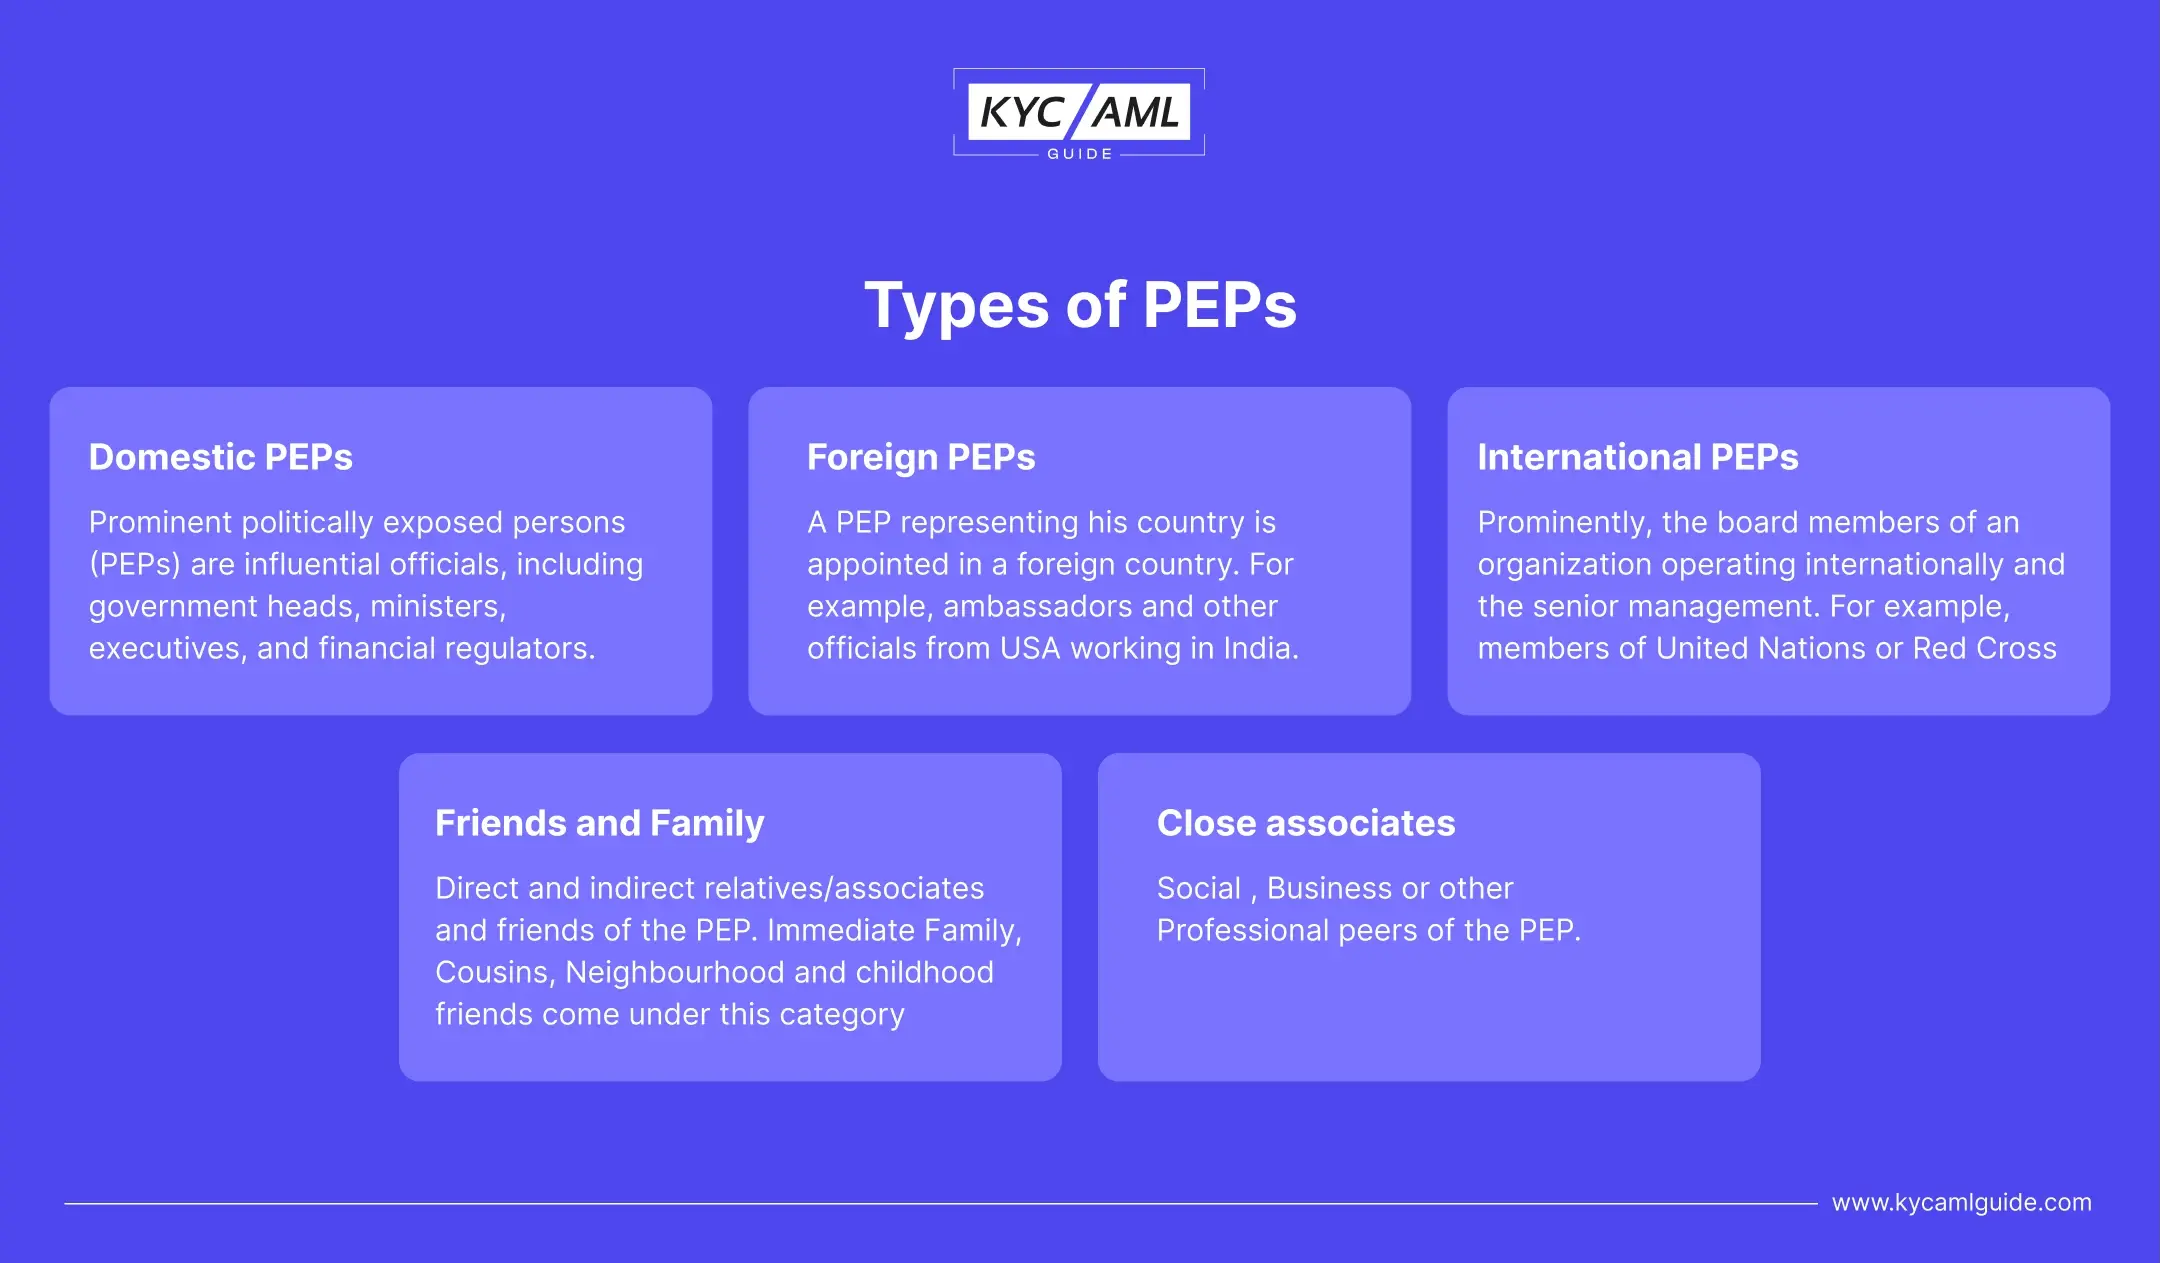 Types of PEPs